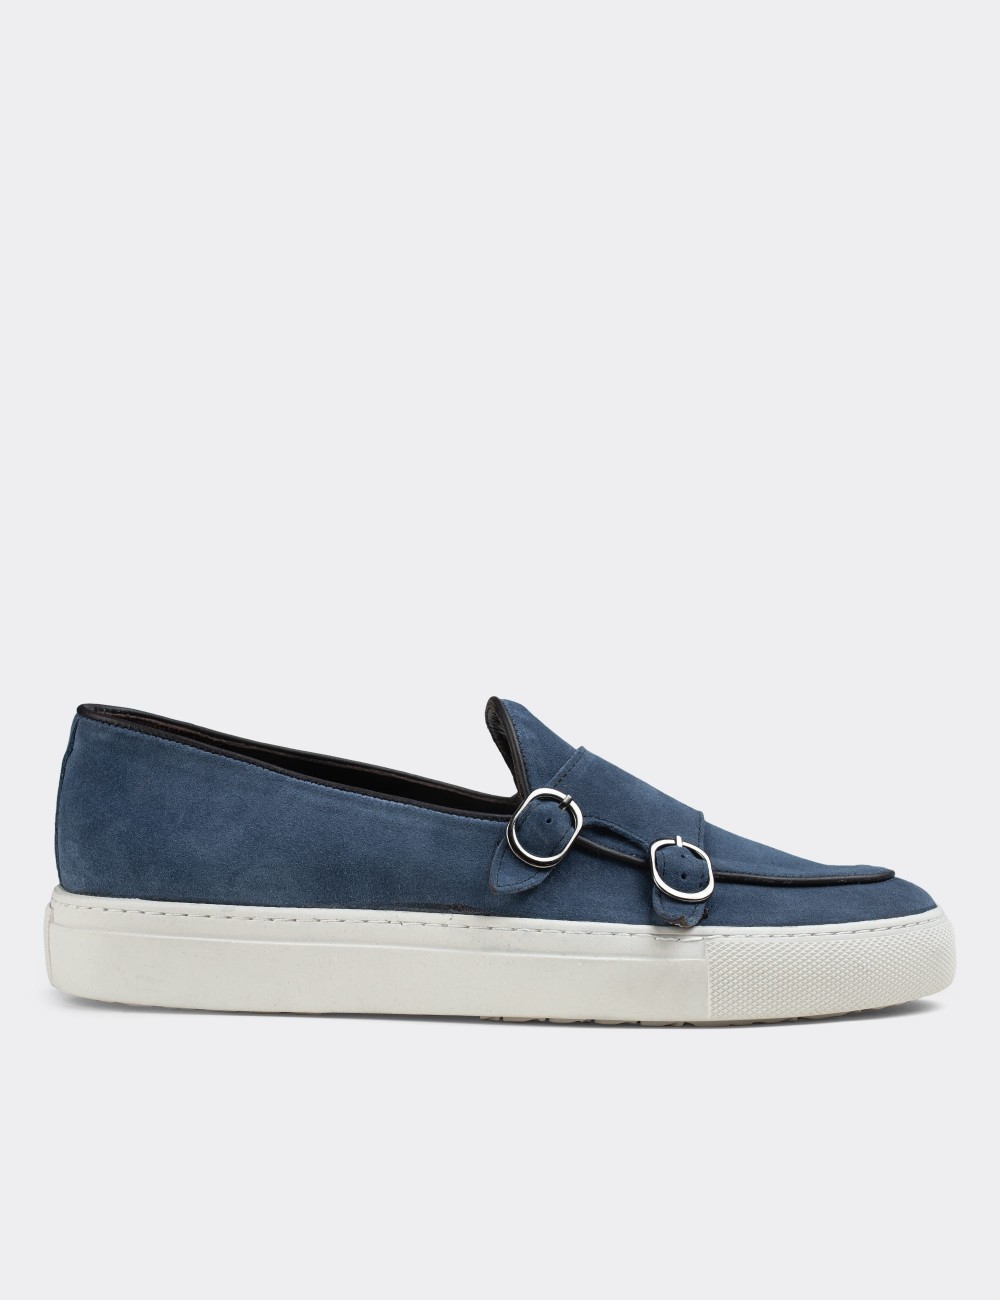 Blue Suede Leather Double Monk-Strap Sneakers - 01846MMVIC01